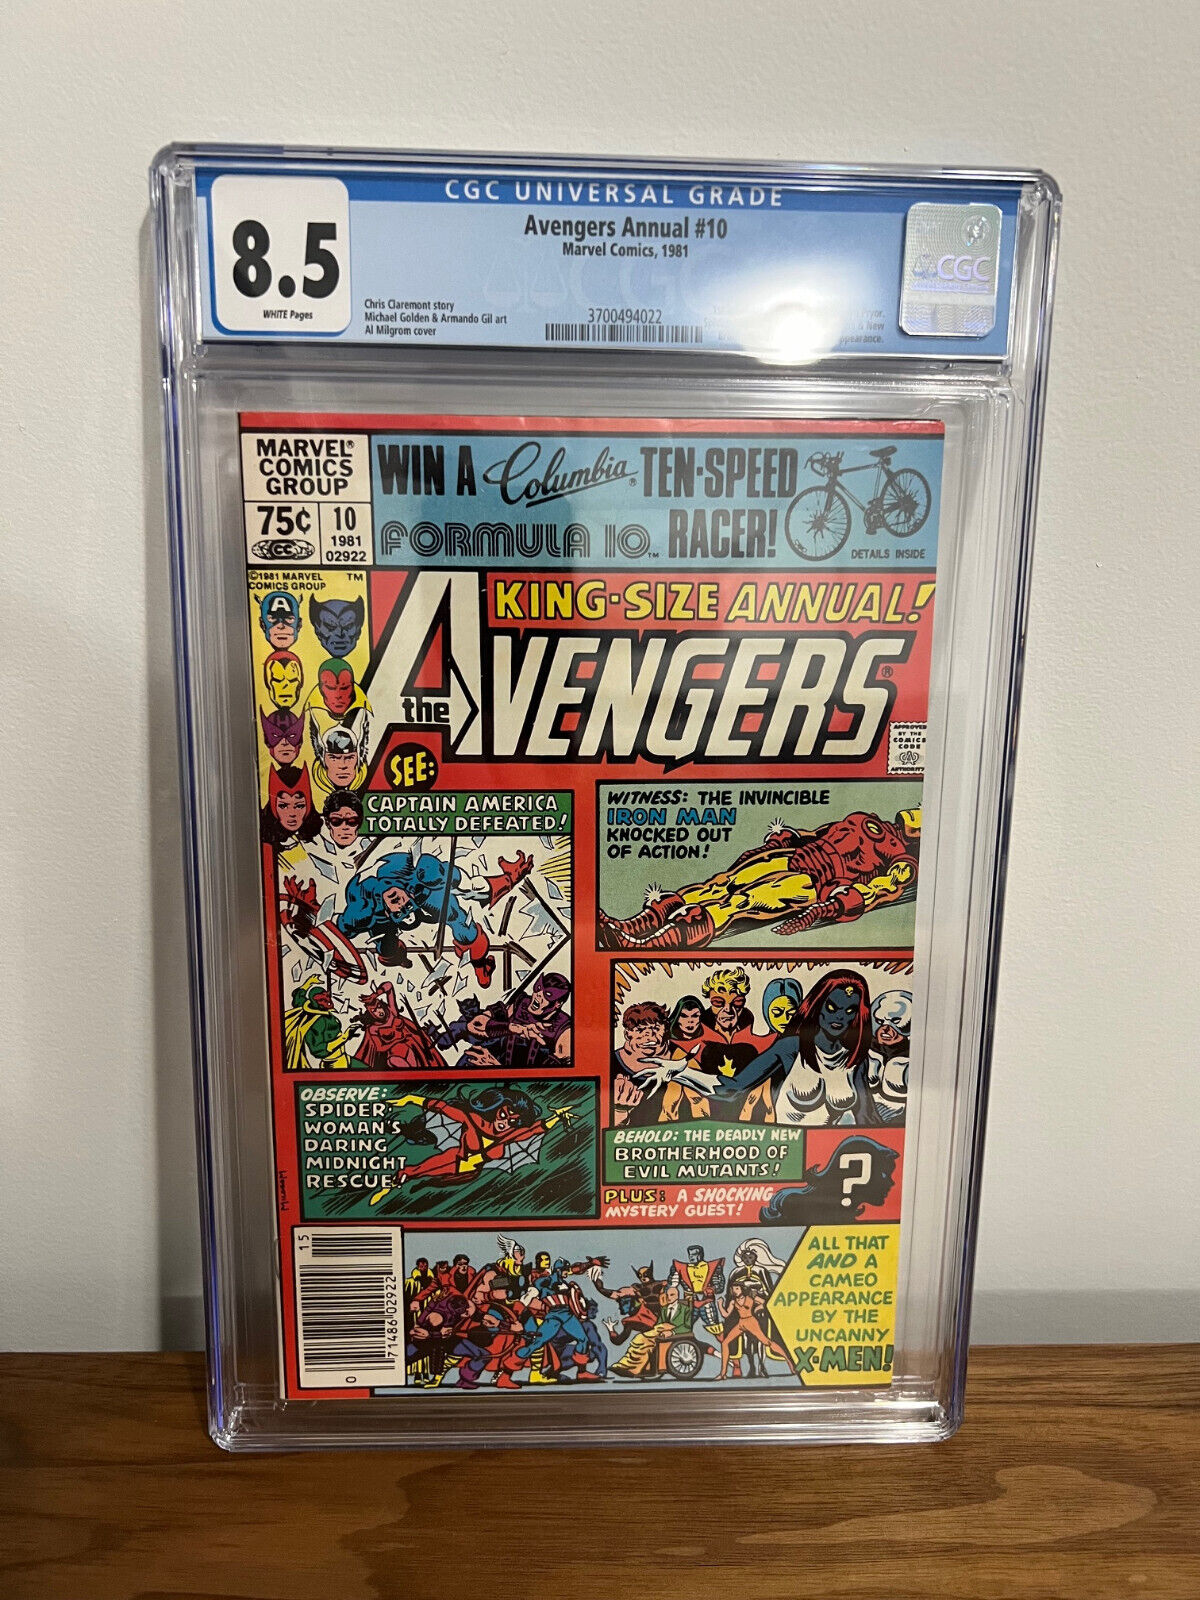 Avengers Annual #10 1981 - 1st Appearance of Rogue - CGC 8.5 White Pages